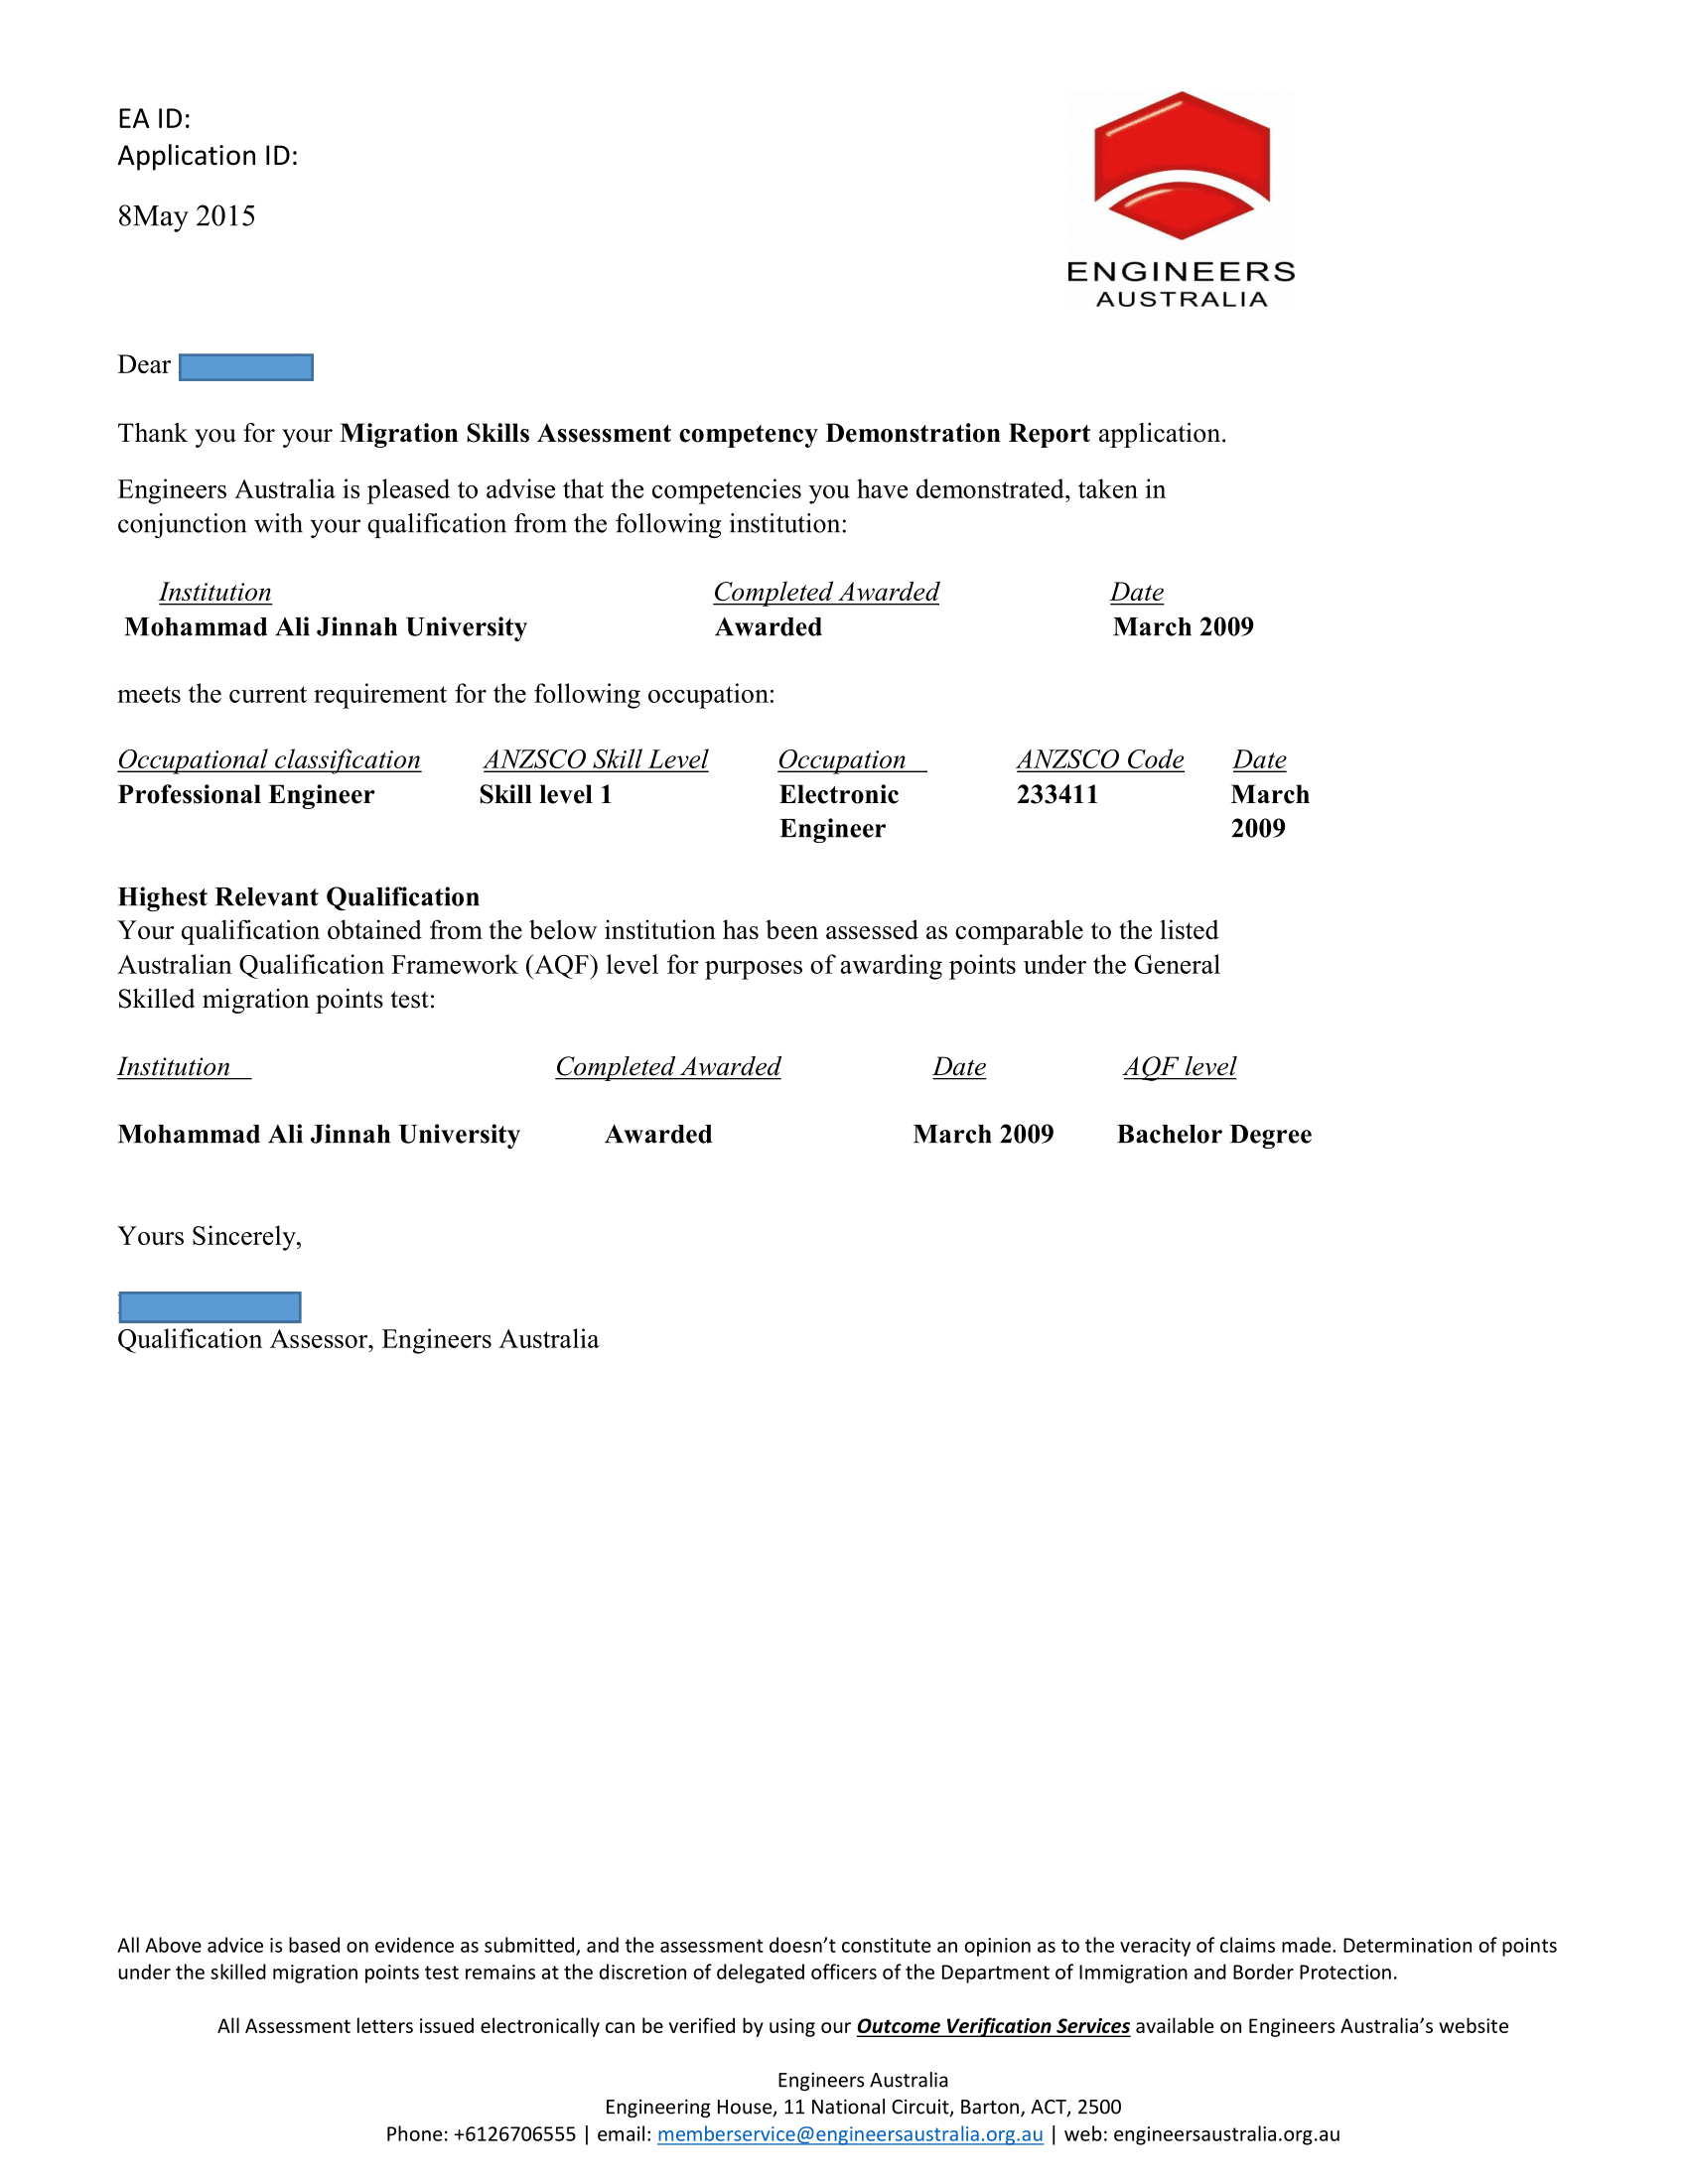 Electronic-Engineer-CDR-Approval-Letter